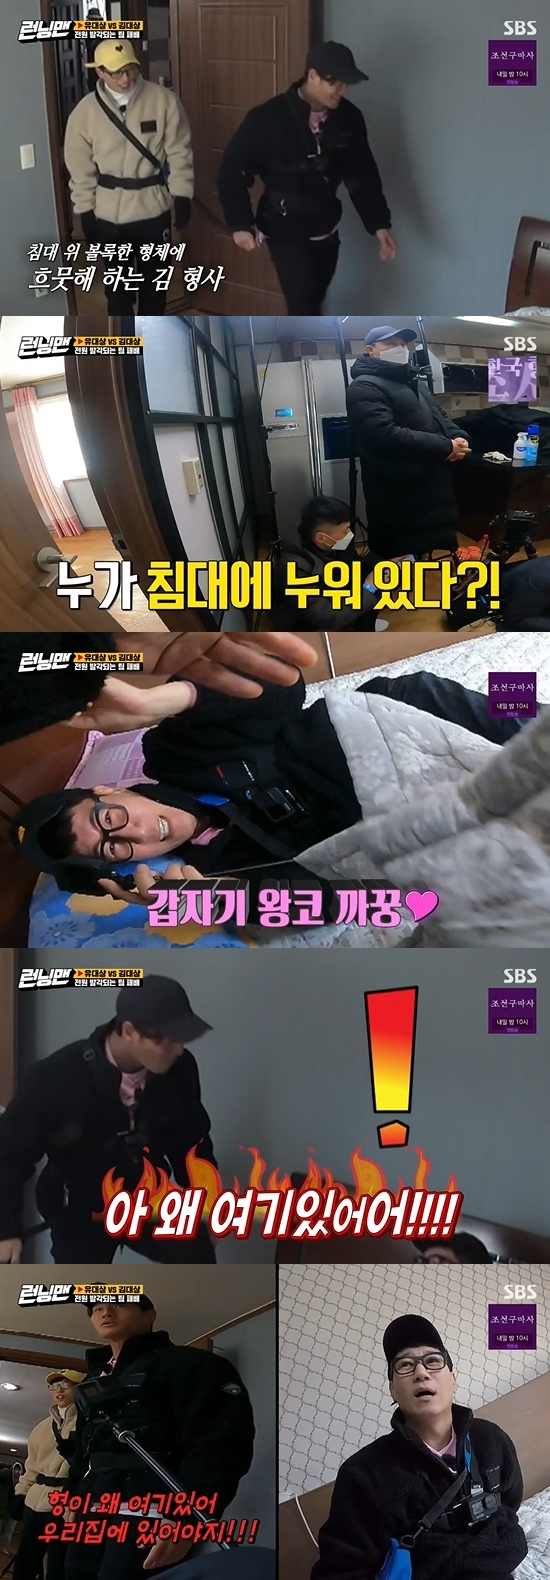 Running Man Kim Jong-kook laughed with anger at the team members who did not do the operation.On the 21st, SBS Good Sunday - Running Man was held in the class of the object.On this day, the members Choices the Judea Award and Kim Dae-sang team ahead of the first mission. Haha, Lee Kwang-soo Choices the Judea Award team.The first mission was Sdongsang Hide and Seek; it was a mission that needed strength; Yoo Jae-Suk seemed to have given up on the word force confrontation, and Haha and Lee Kwang-soo were anxious.Wheres the operation, were just fighting back, were each a student, Yoo Jae-Suk said.Lee Kwang-soo and Haha said they would not come to the Judea award team on the next mission when Yoo Jae-Suk went out.Yoo Jae-Suk asked Kim Jong-kook not to use too much power, but Kim Jong-kook said, Do not you have to make the picture that the production team wants?The team members then began hiding Yoo Jae-Suk and Kim Jong-kook.Lee Kwang-soo sprinted to the tidal flat, hid in a rocky crevice, and shouted go away to the drone filming him.Kim Jong-kook, who thought the team members would be in Kim Dae-sangs room, dragged Yoo Jae-Suk into the Judea room.But Ji Suk-jin, who was supposed to be in Kim Dae-sangs house, was lying in bed; Ji Suk-jin called it pake paper, and Kim Jong-kook said, Why do you have Fake alone?I have to match it with me. Ji Suk-jin said, I have to keep the blanket out. In addition to Ji Suk-jin, Jeon So-min was hiding in the Yoo Jae-Suk house, which Kim Jong-kook was absurd, saying it was conspiracy.Yoo Jae-Suk also found Yang Se-chan, and Kim Jong-kook, who continued to find his team, ranted.Kim Jong-kook moved in anger, saying, Why are these not home?Kim Jong-kook turned around after discovering the same team Song Ji-hyo while trying to find Lee Kwang-soo to the tidal flat.But Yoo Jae-Suk, who felt suspicious, found Song Ji-hyo and won the victory.Members who heard that Lee Kwang-soo had gone to the house to hide were disgusted, saying, You really went in?Kim Jong-kook, who lost, muttered that it was because of the team members conspiracy; the crew laughed, referring to the pledge, who said, Do not forget the pledge content.Jeon So-min changed into Judea-sang clothes right away; Kim Jong-kook said: I dont think Ill win, Ill point it out for a penalty.Lee Kwang-soo, the first team members, see.Yoo Jae-Suk said, I went to the end, and its arrogant. Kim Jong-kook took me to my house with confidence, and Seokjin was lying down.Photo = SBS Broadcasting Screen